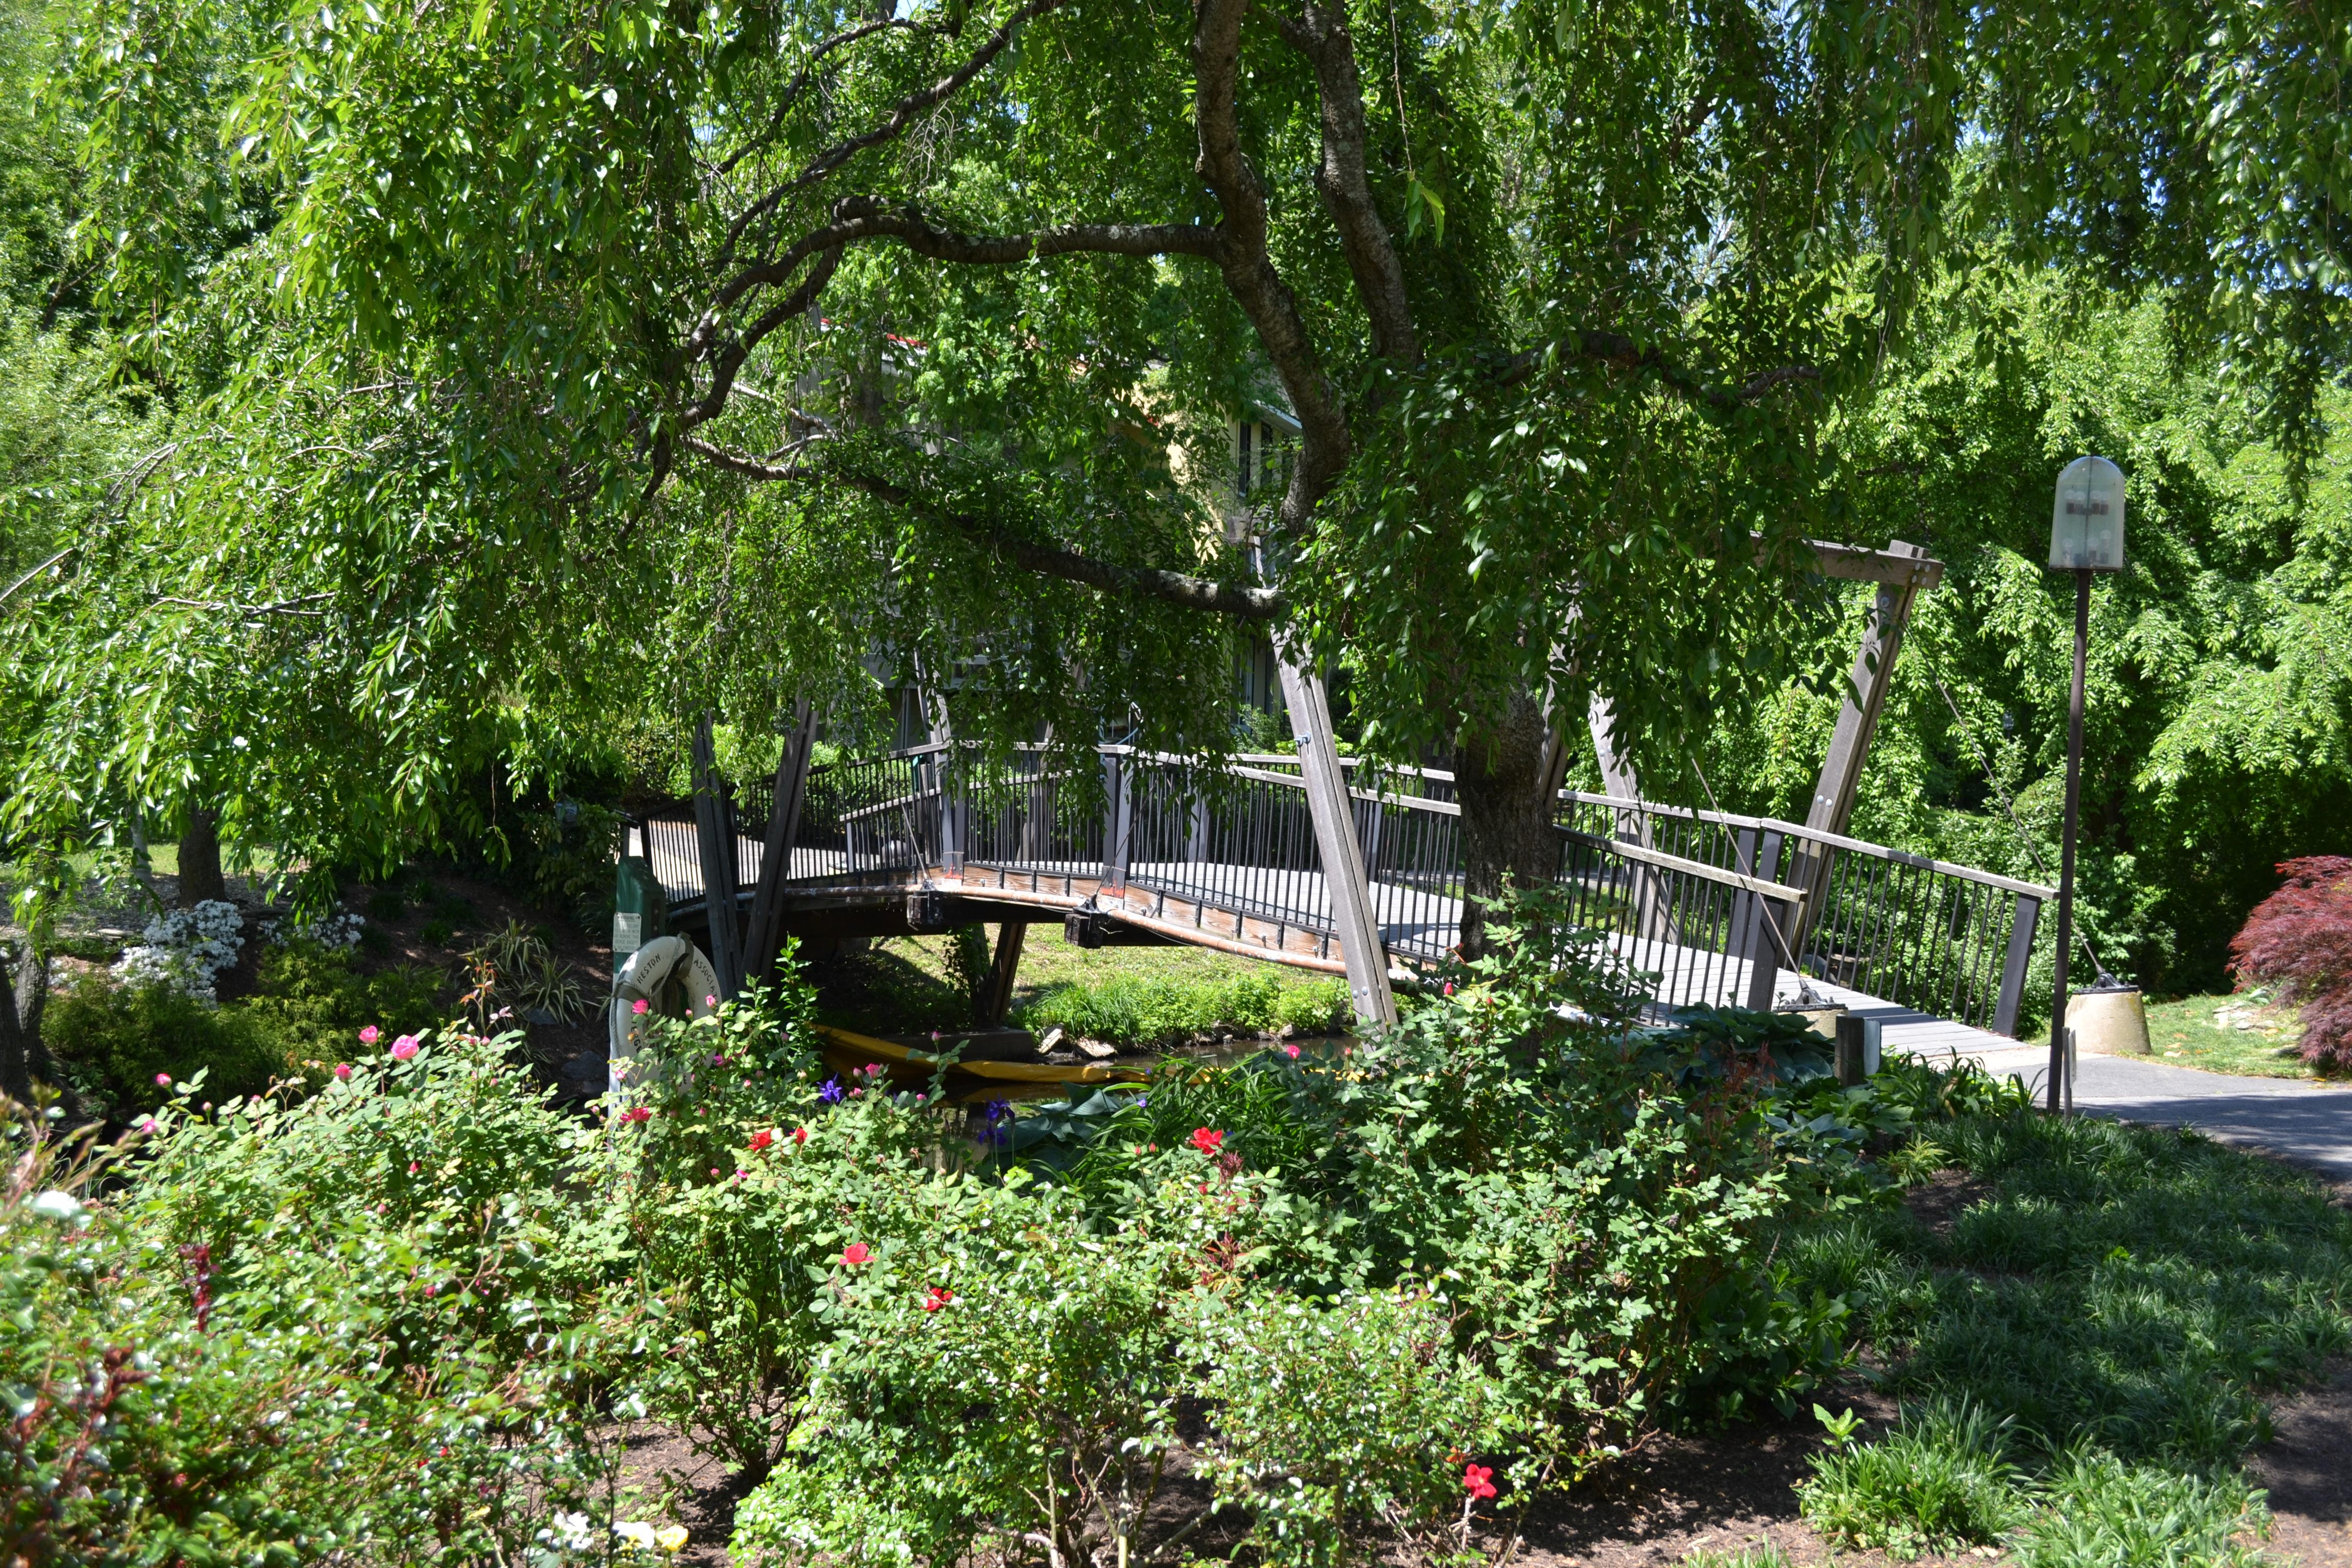 If you ever go over to Lake Anne to shop, eat or go to the Farmers Market, be sure to take a walk down toward the lake and follow the path to the right. You will come upon this beautiful bridge. It is a 'must see' for all Restonians!